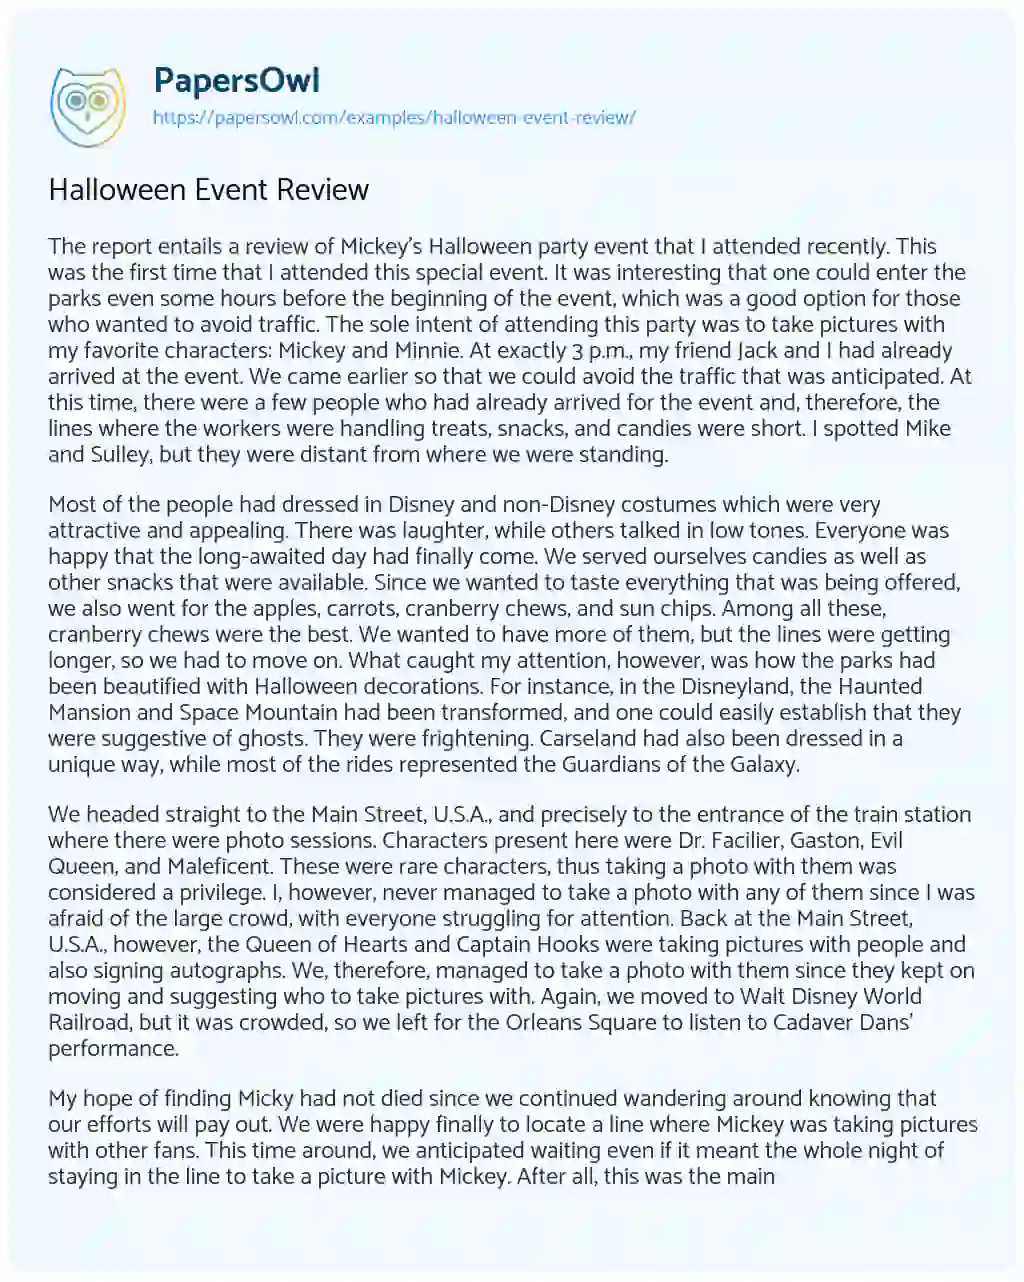 Essay on Halloween Event Review